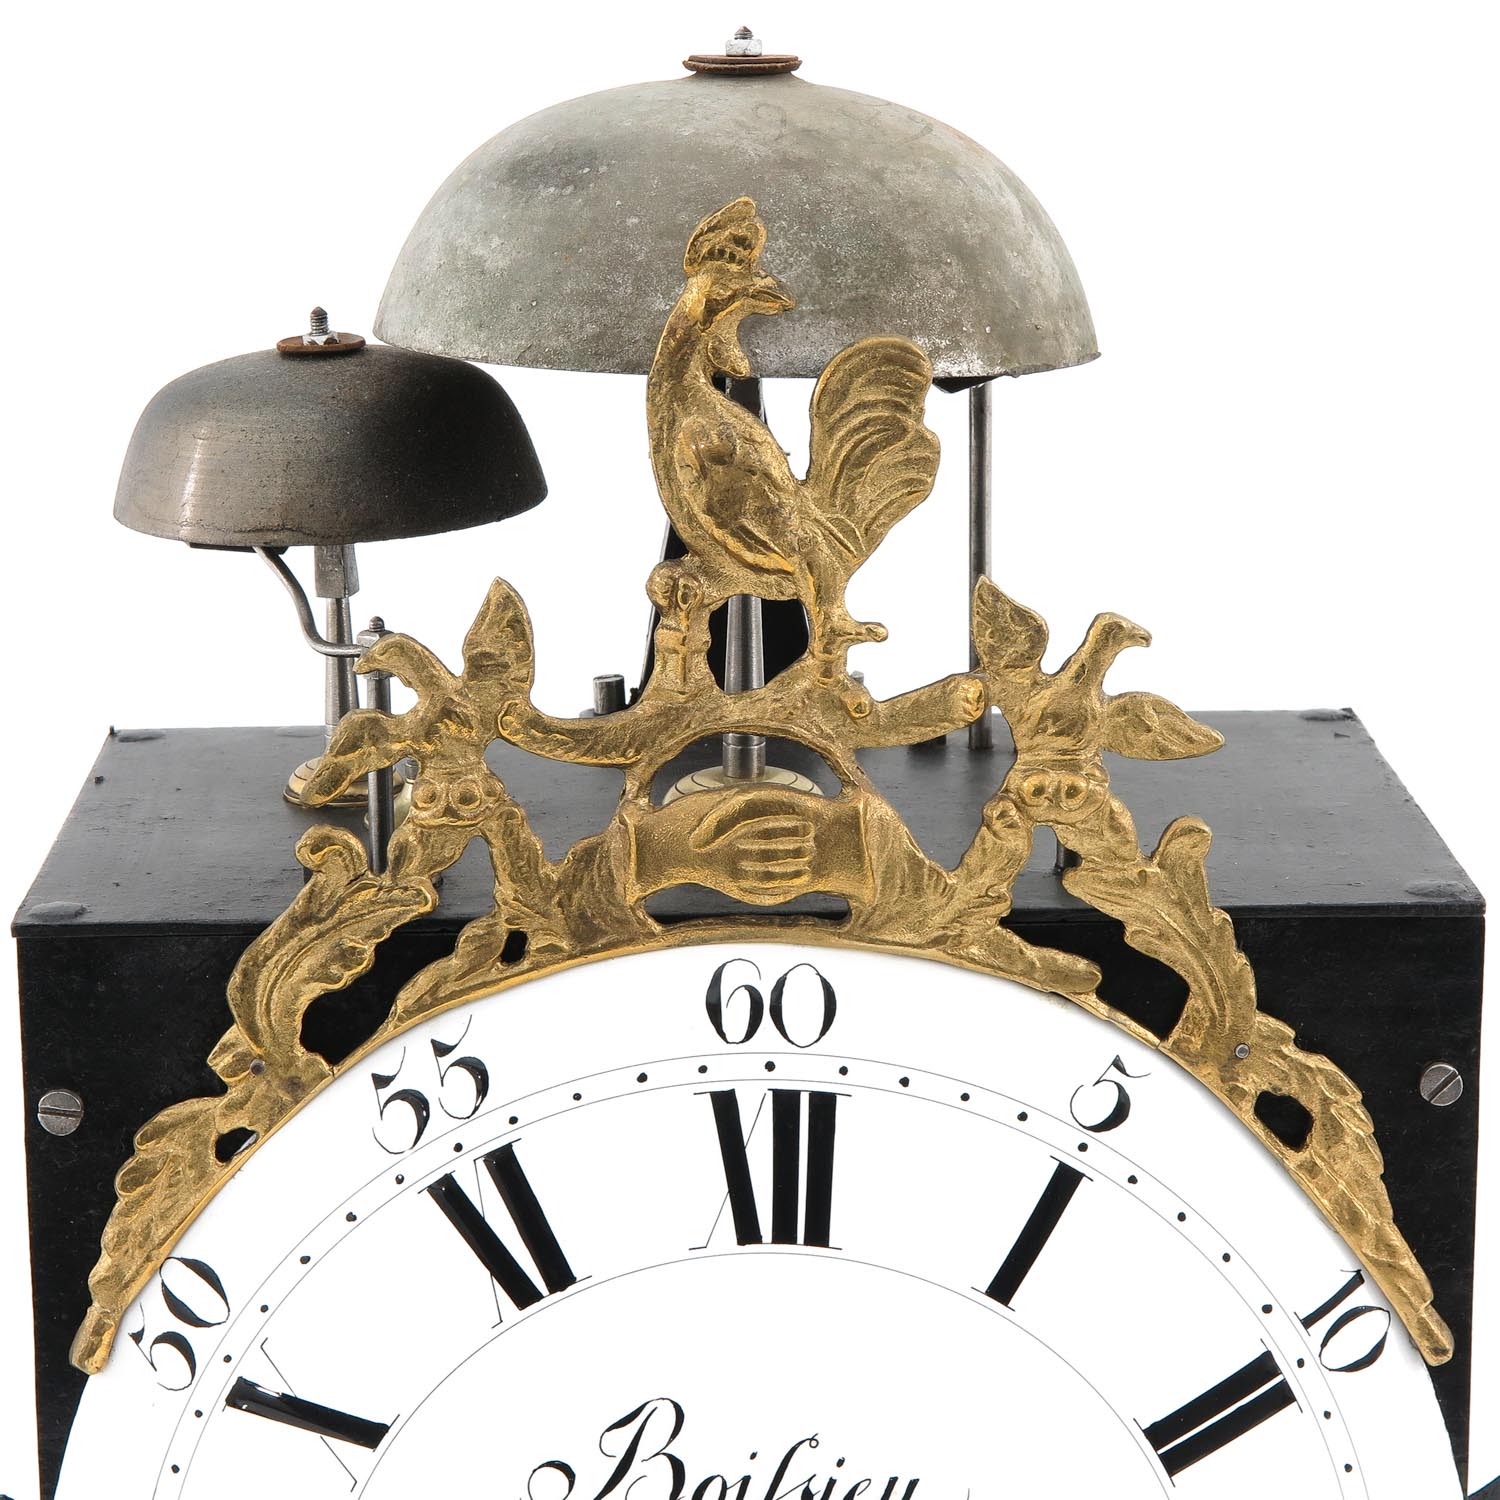 A French Comtoise Clock Signed Boifsieu a Chambery - Image 9 of 9